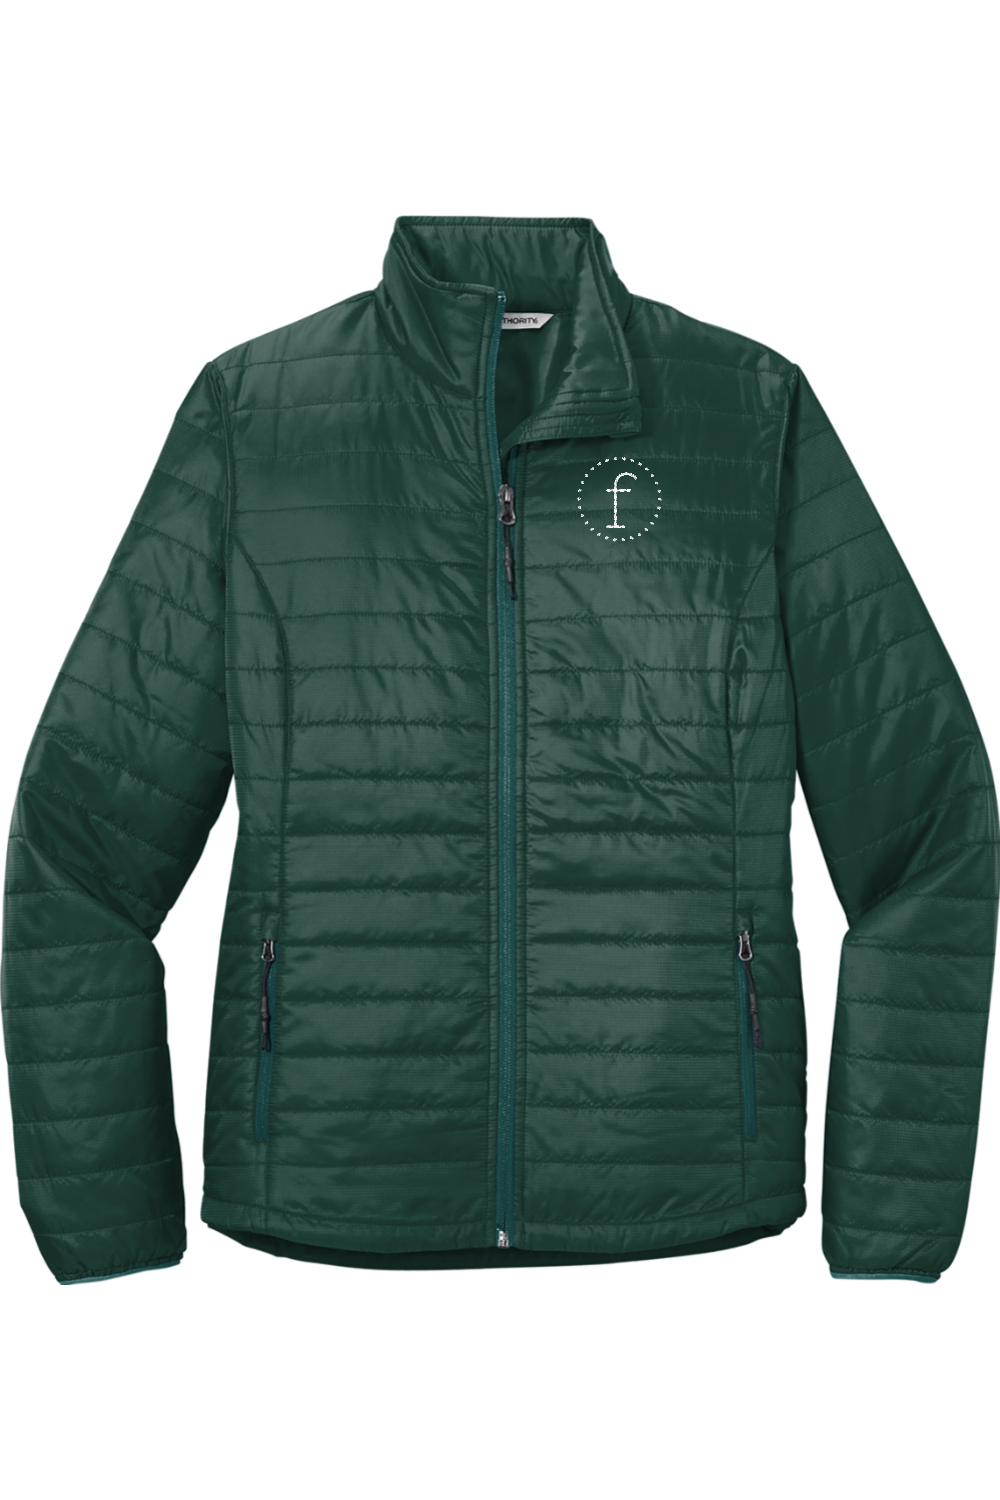 Frae Authority Ladies Packable Puffy Jacket